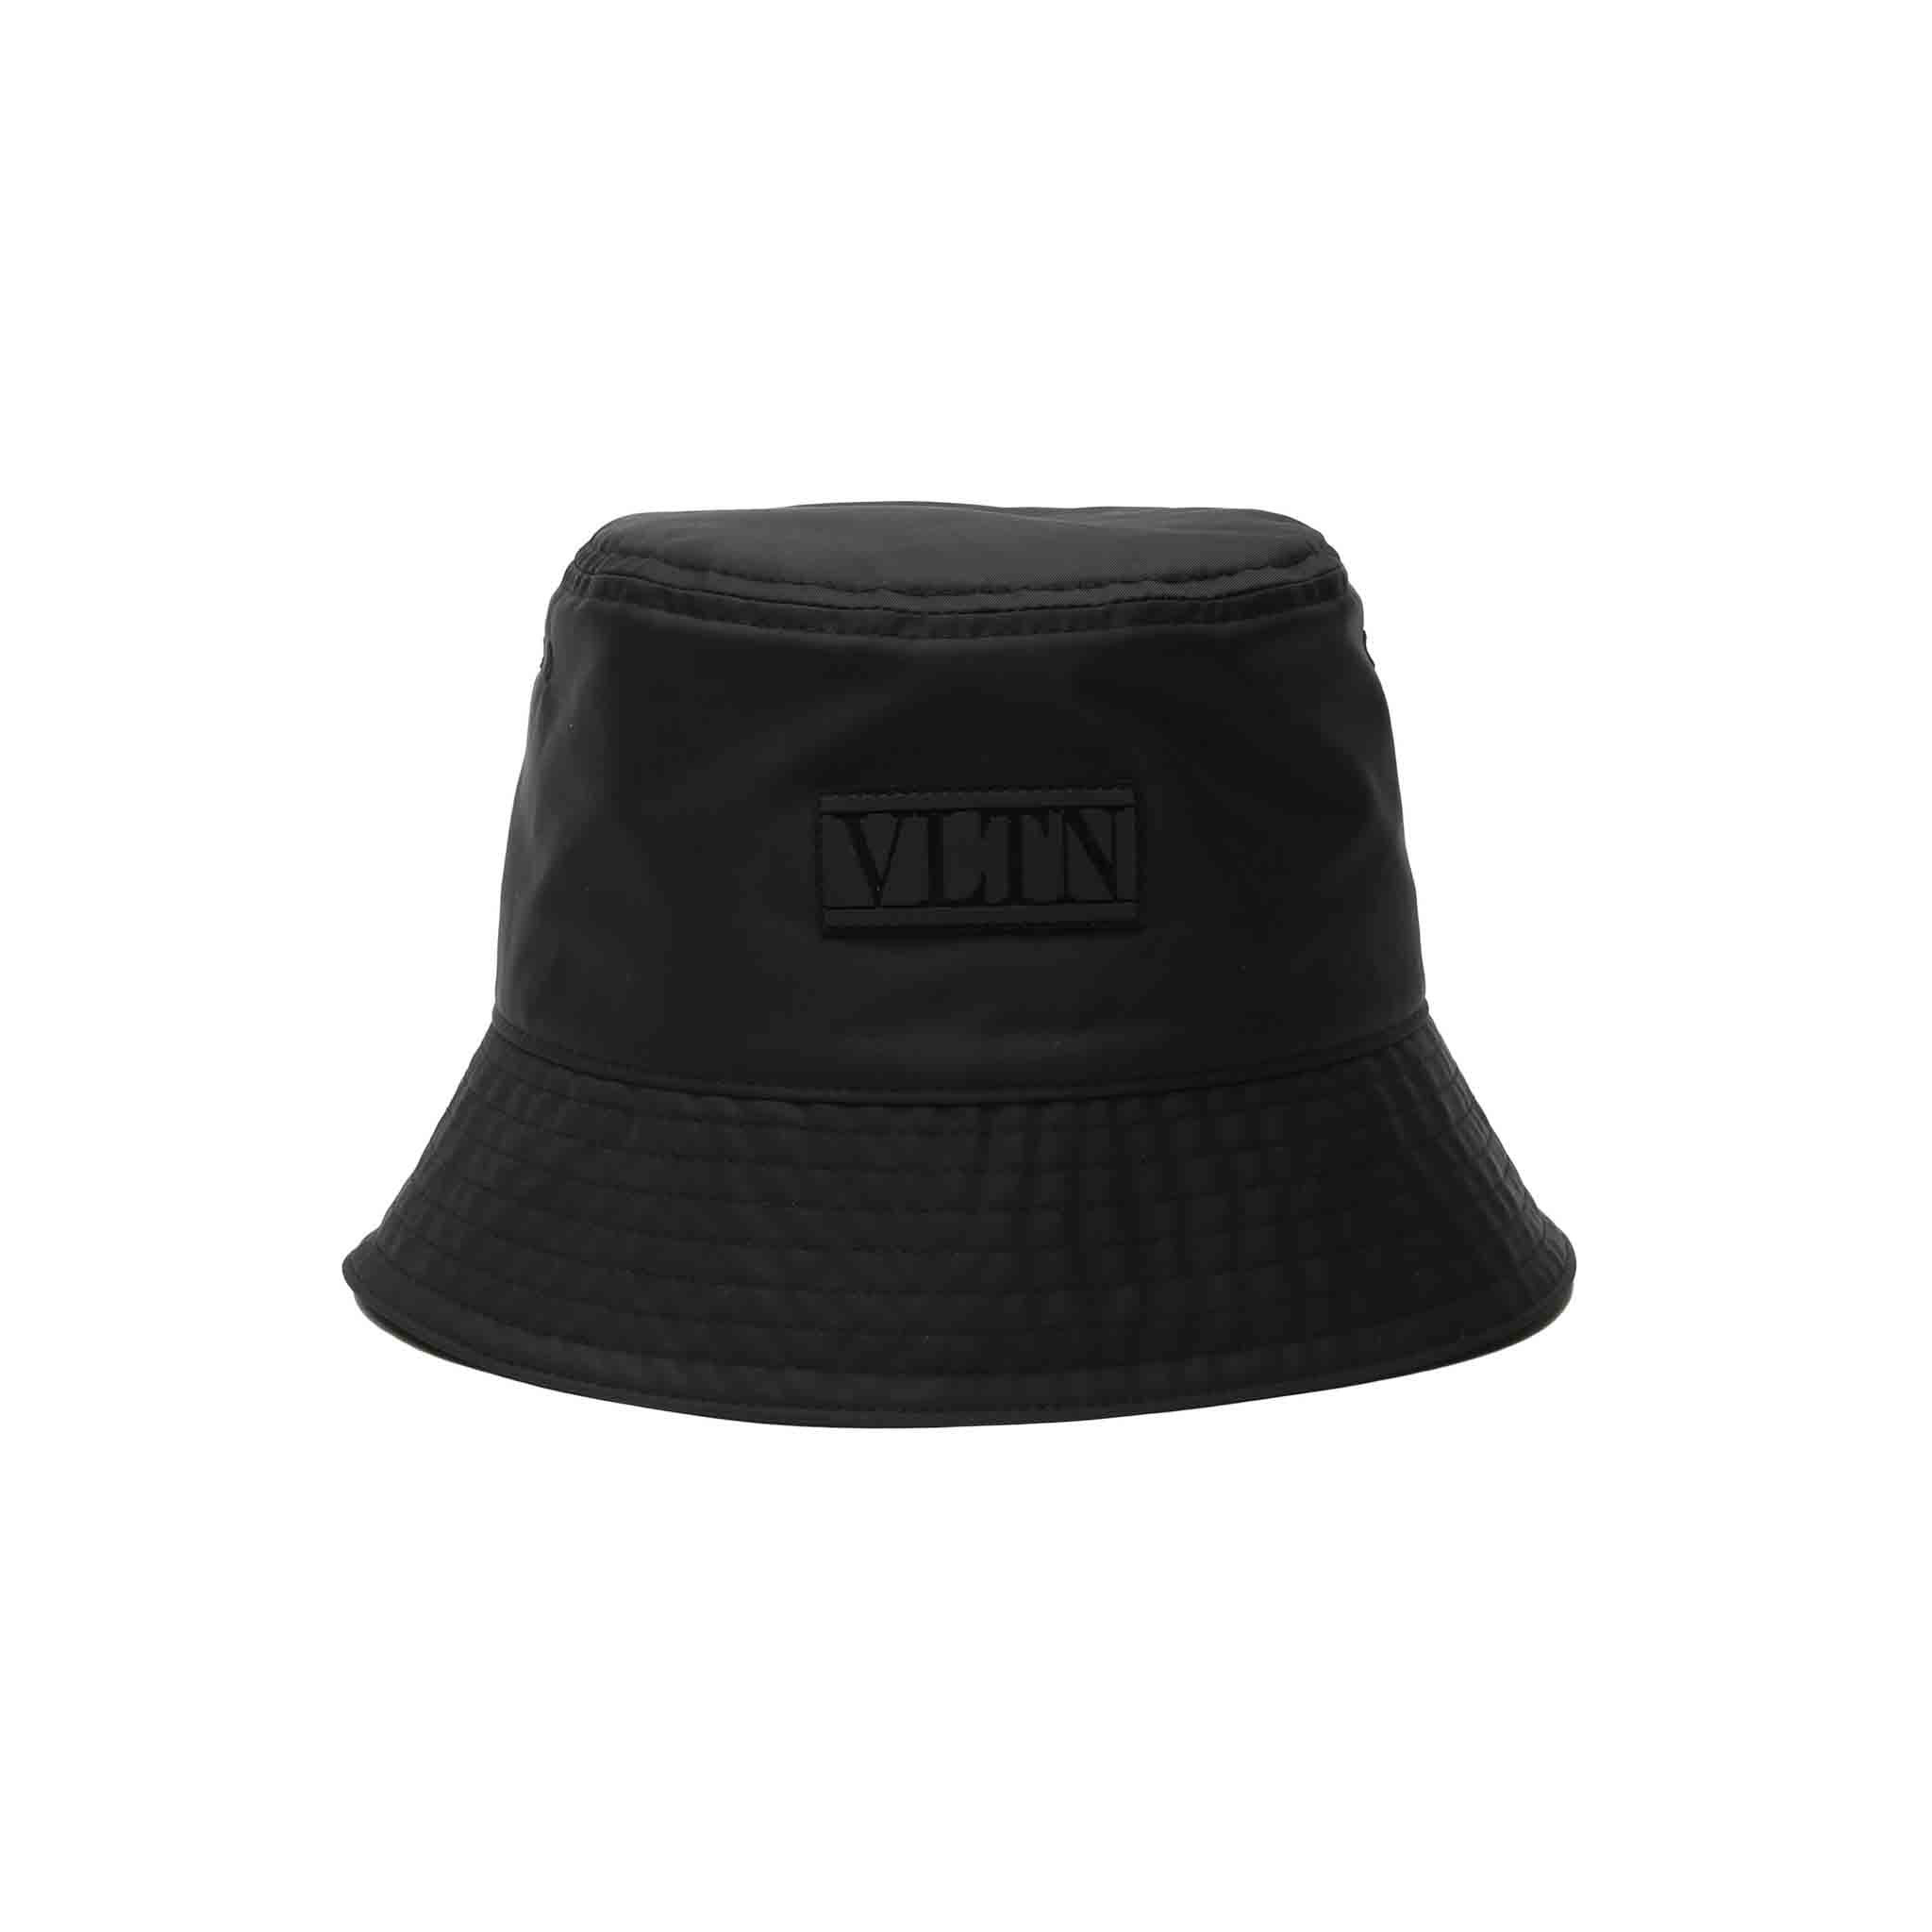 This stylish Valentino VLTN bucket hat is made of durable nylon and features a rubber VLTN logo on the front. It is available in sizes 58-59-60 and is made in Italy. This hat comes in a classic all black colour. It is perfect for any casual occasion.